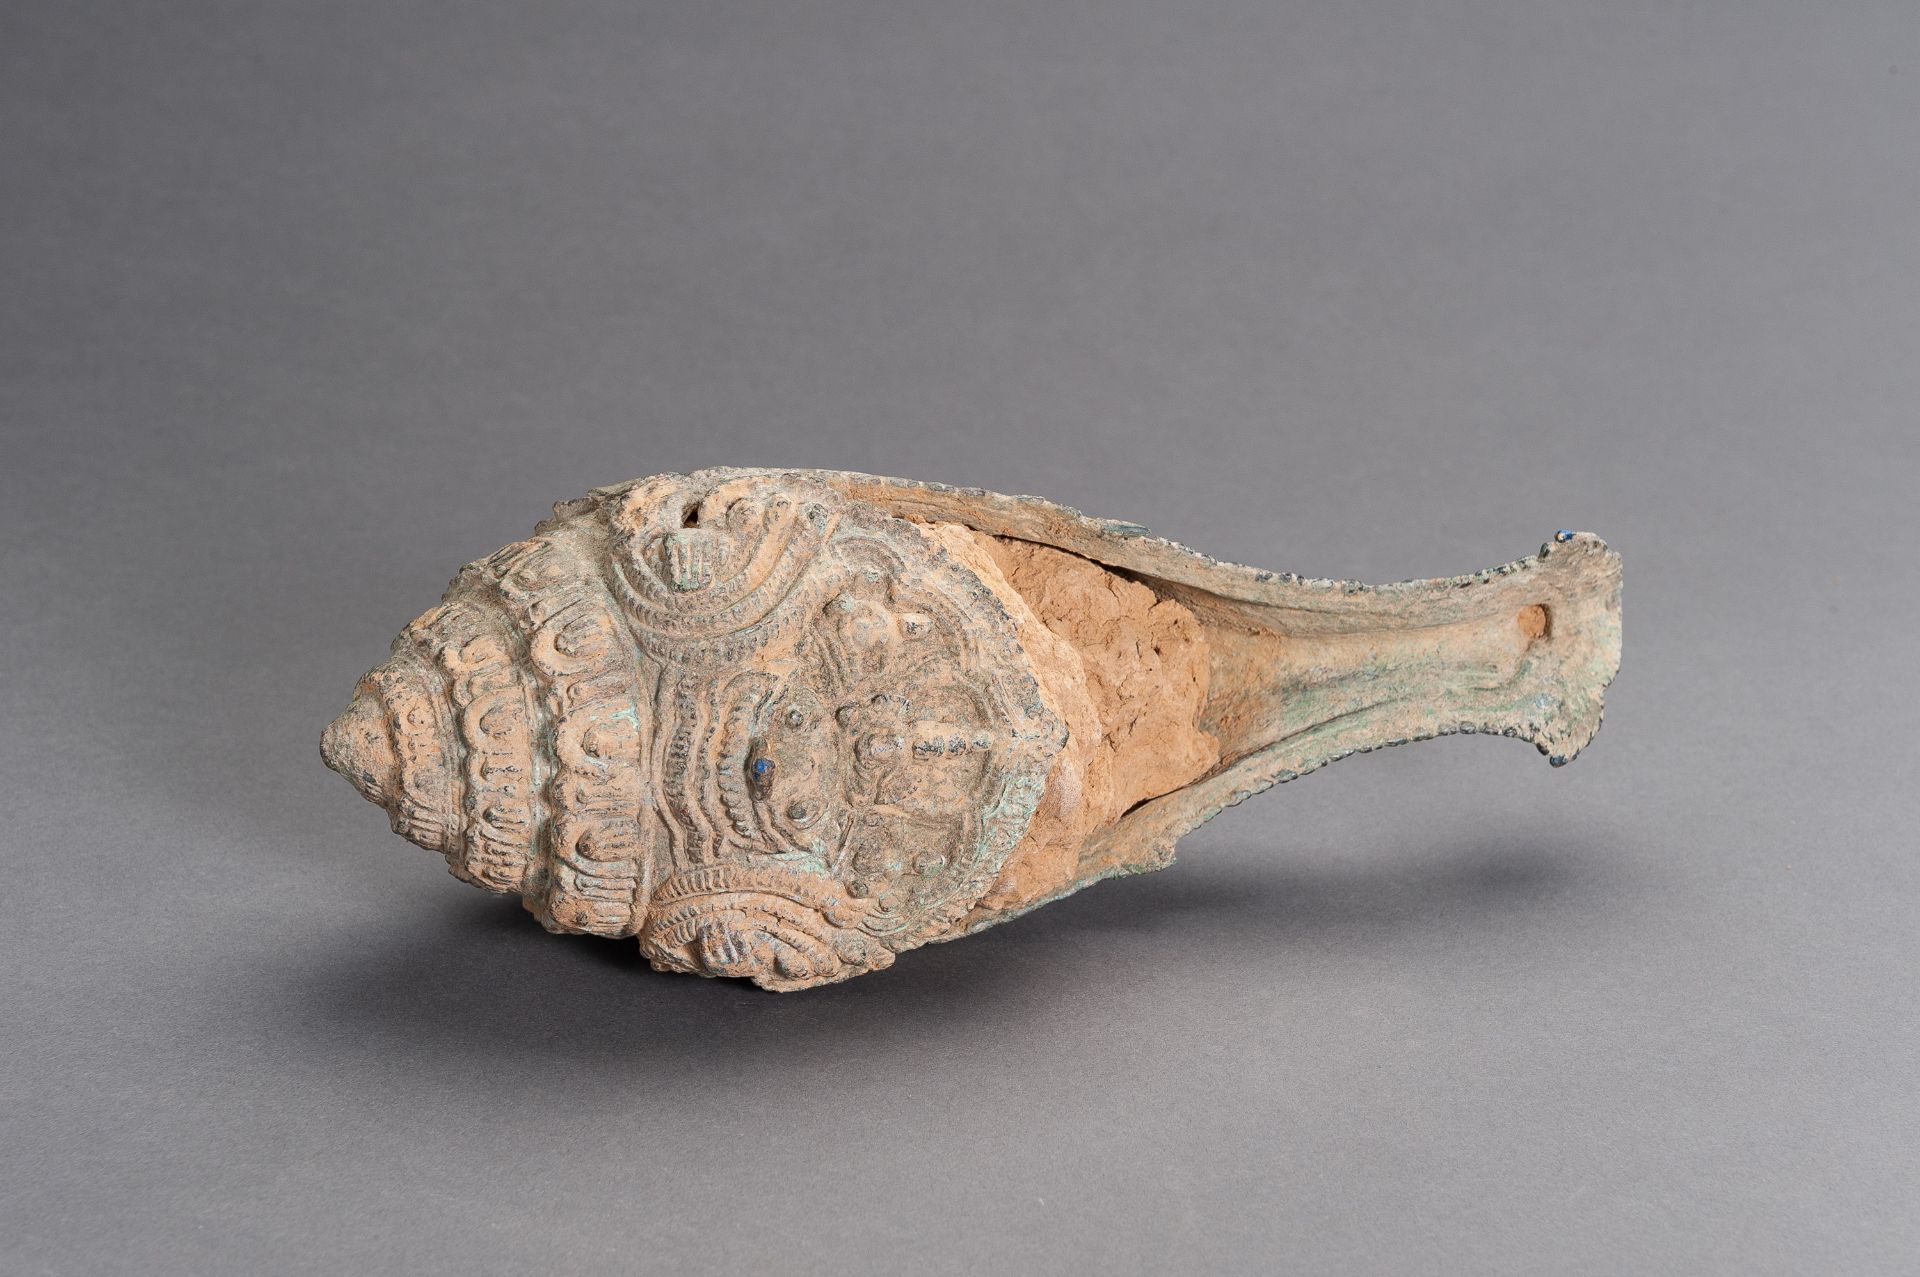 A LARGE 'BIRD SHAPE' BRONZE KHMER CONCH SHELL - Image 7 of 10